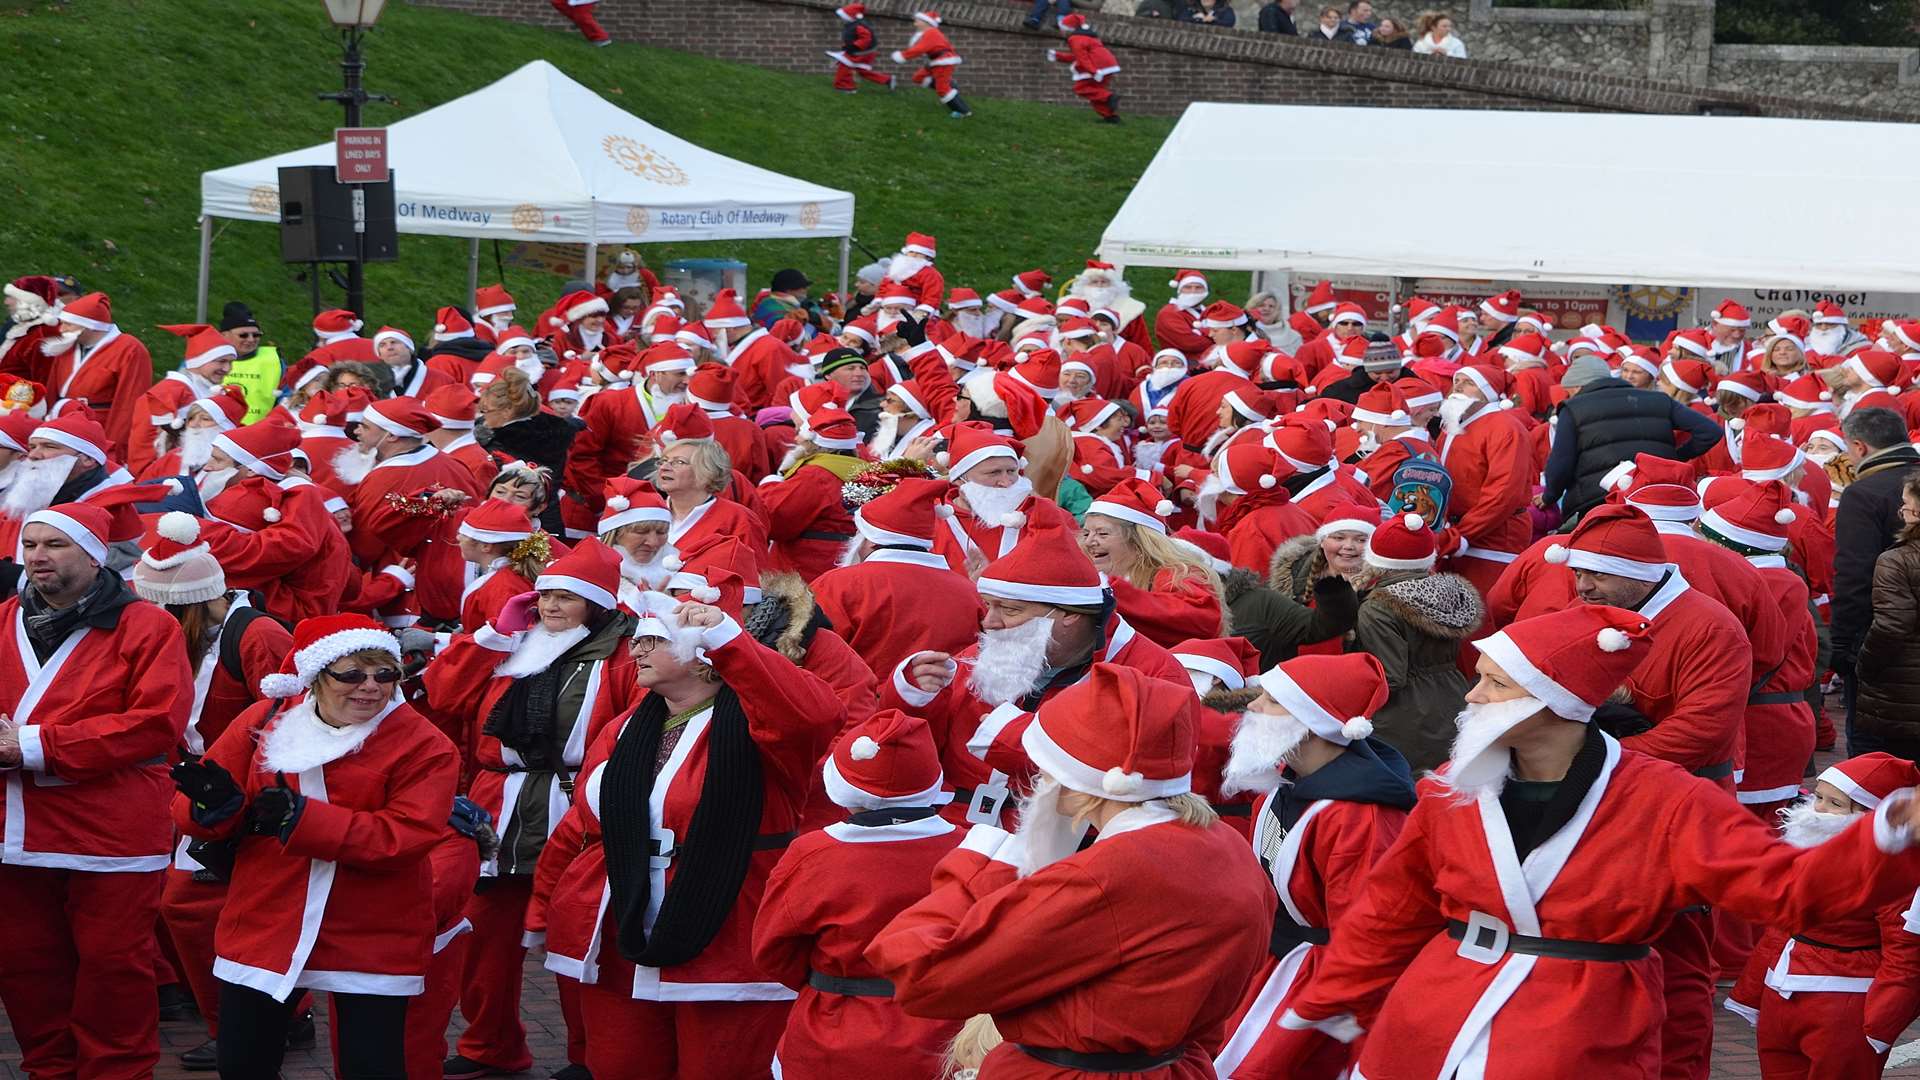 On your marks get set snow! The Santa fun runners gather at the start of the race outside Rochester Castle [credit: Jason Arthur]